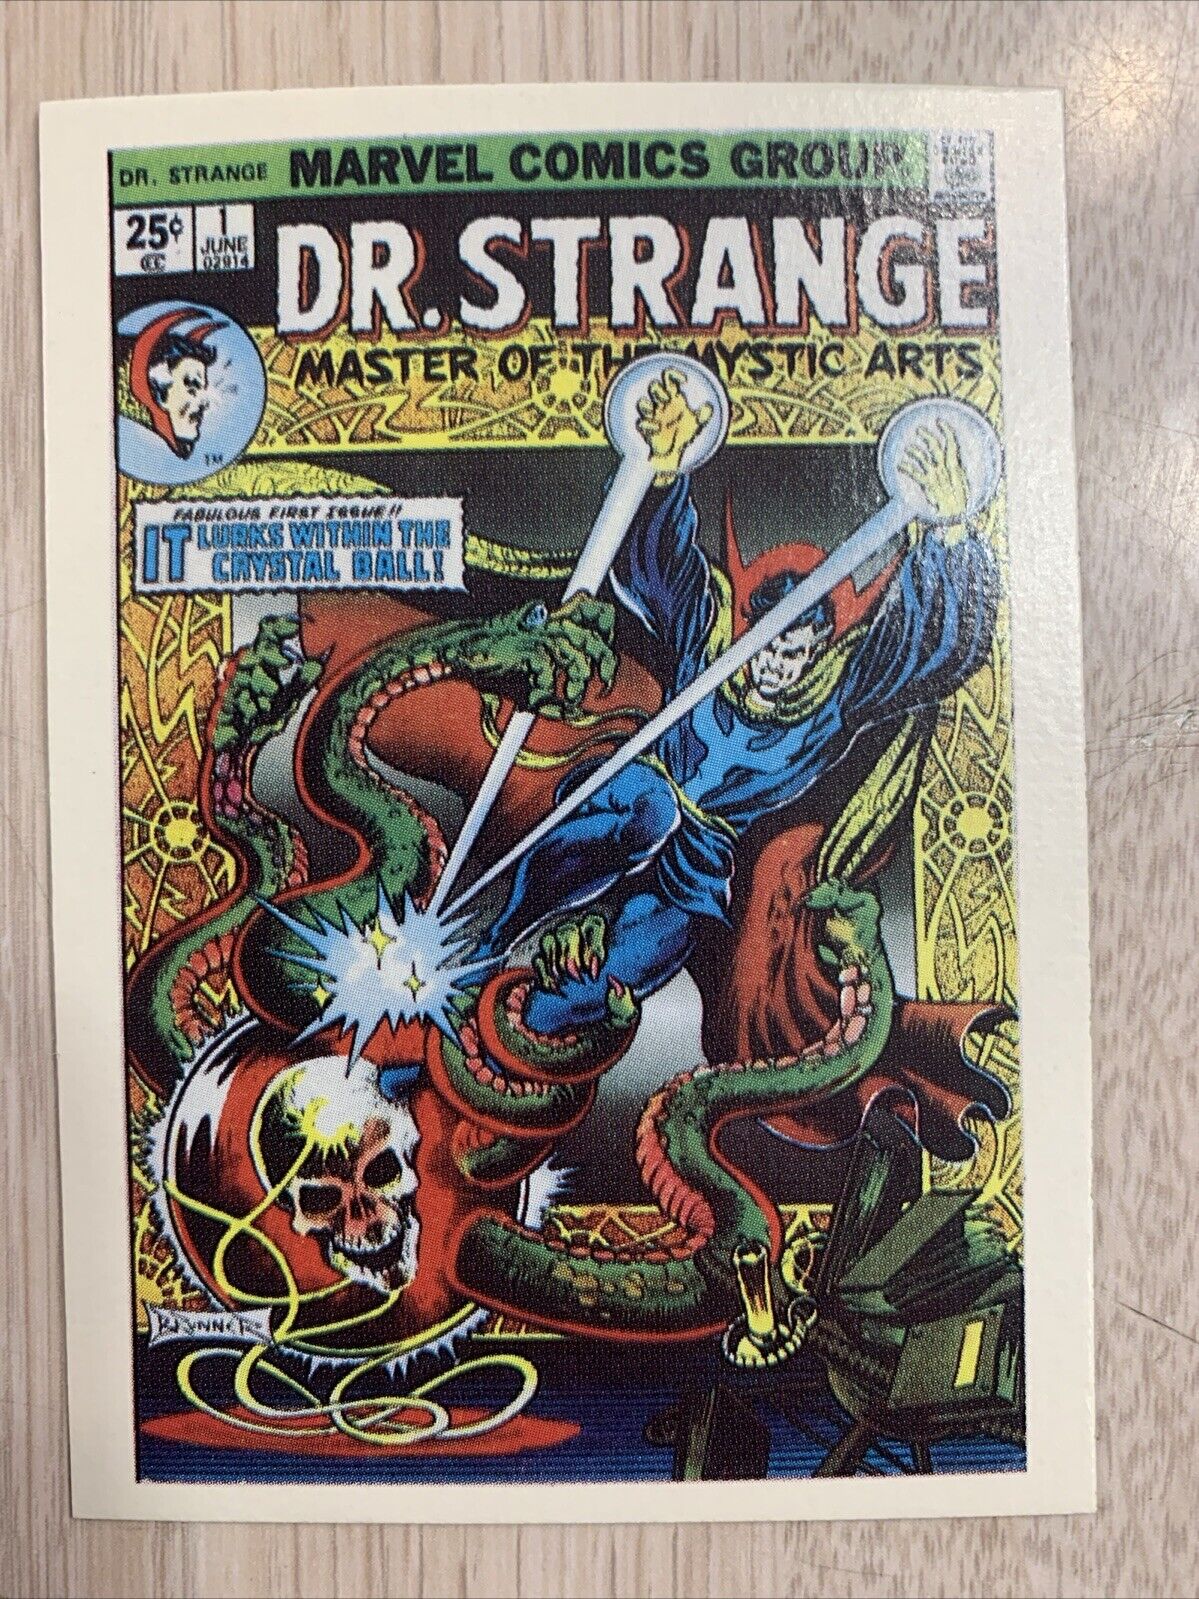 DR. STRANGE #1 MARVEL SUPERHEROES FIRST ISSUE COVERS CARD NM 1984 BEAUTIFUL